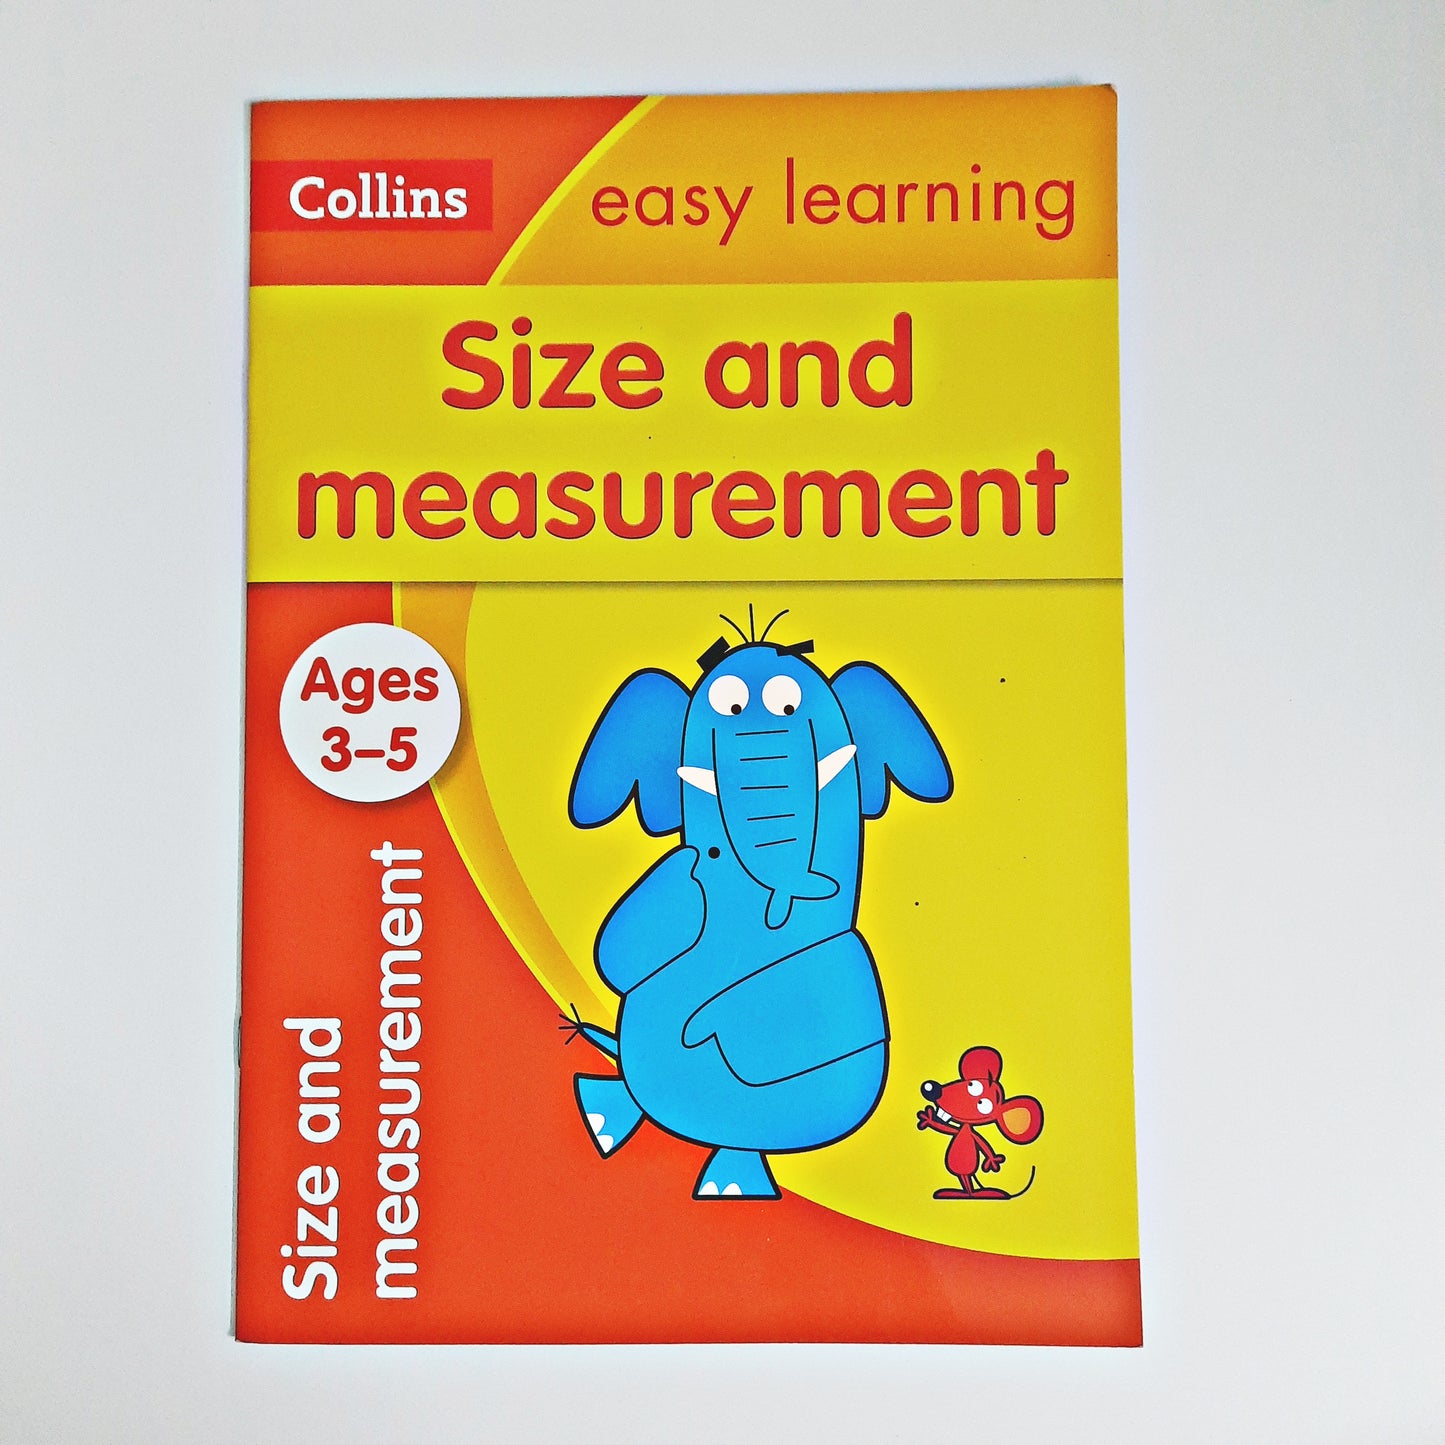 Collins - Size and Measurement